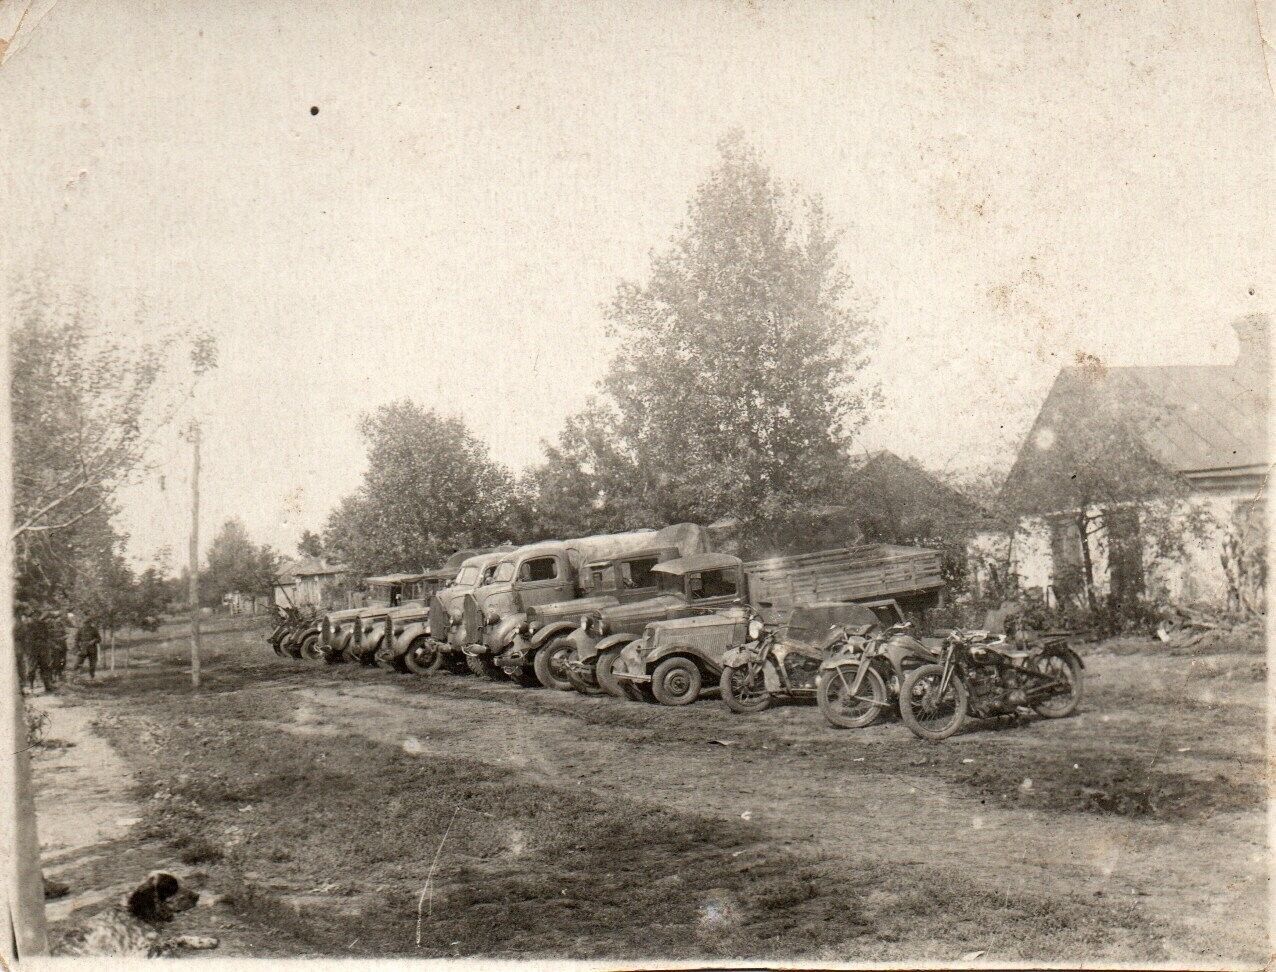 ROMANIA MILITARY PHOTO - CARS AND MOTORCYCLES OF THE ROMANIAN ARMY WWII PHOTO